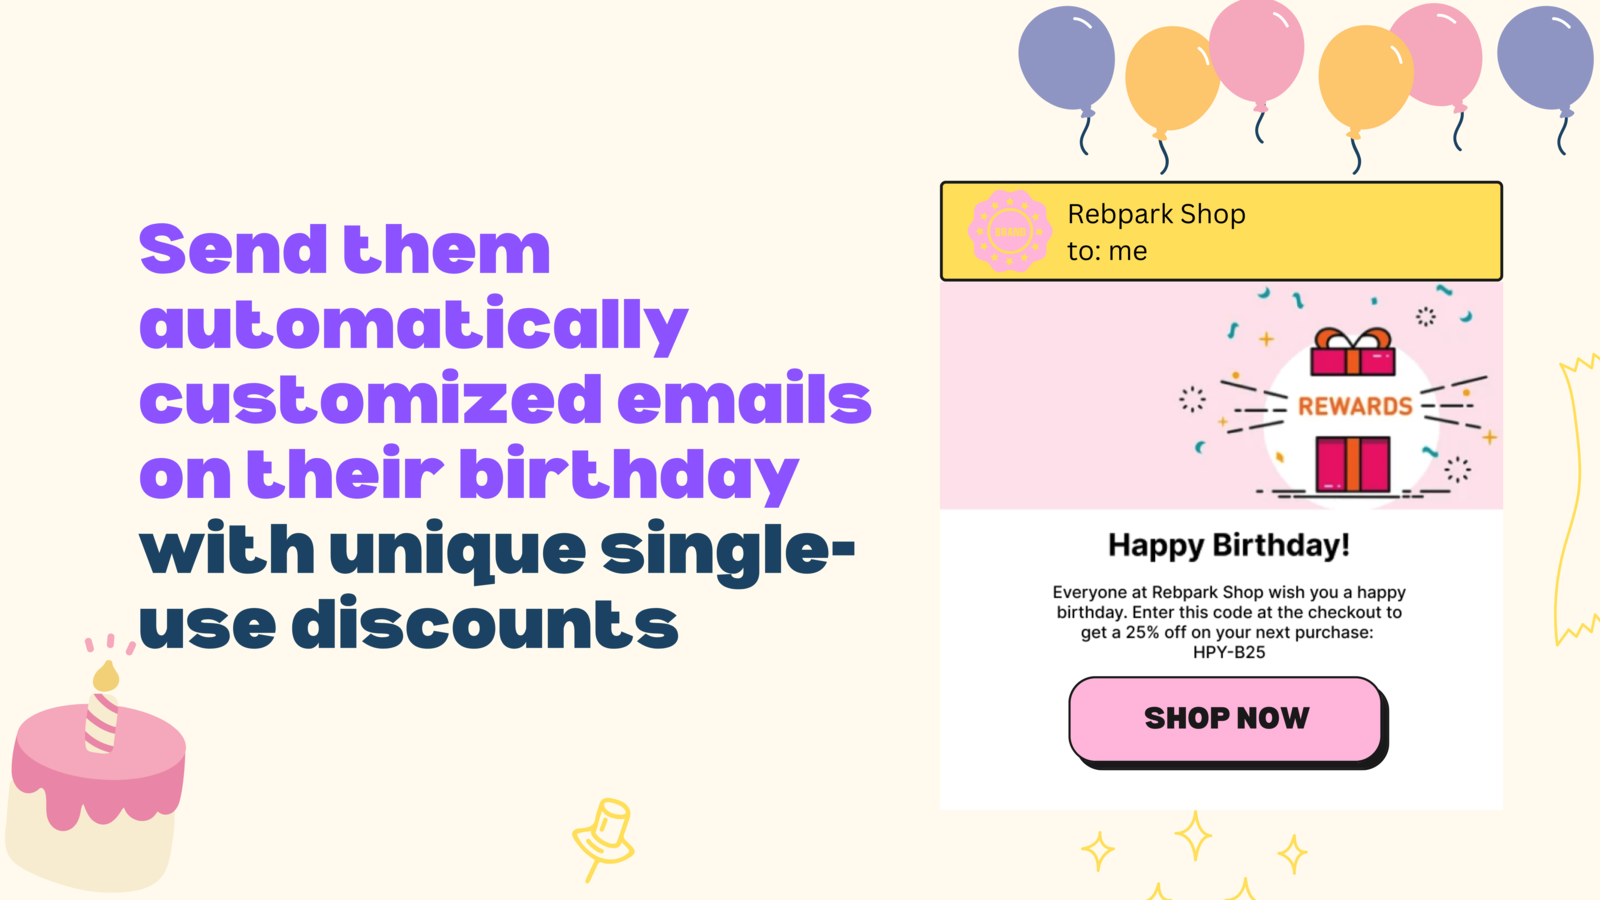 Collect your customers birthday information